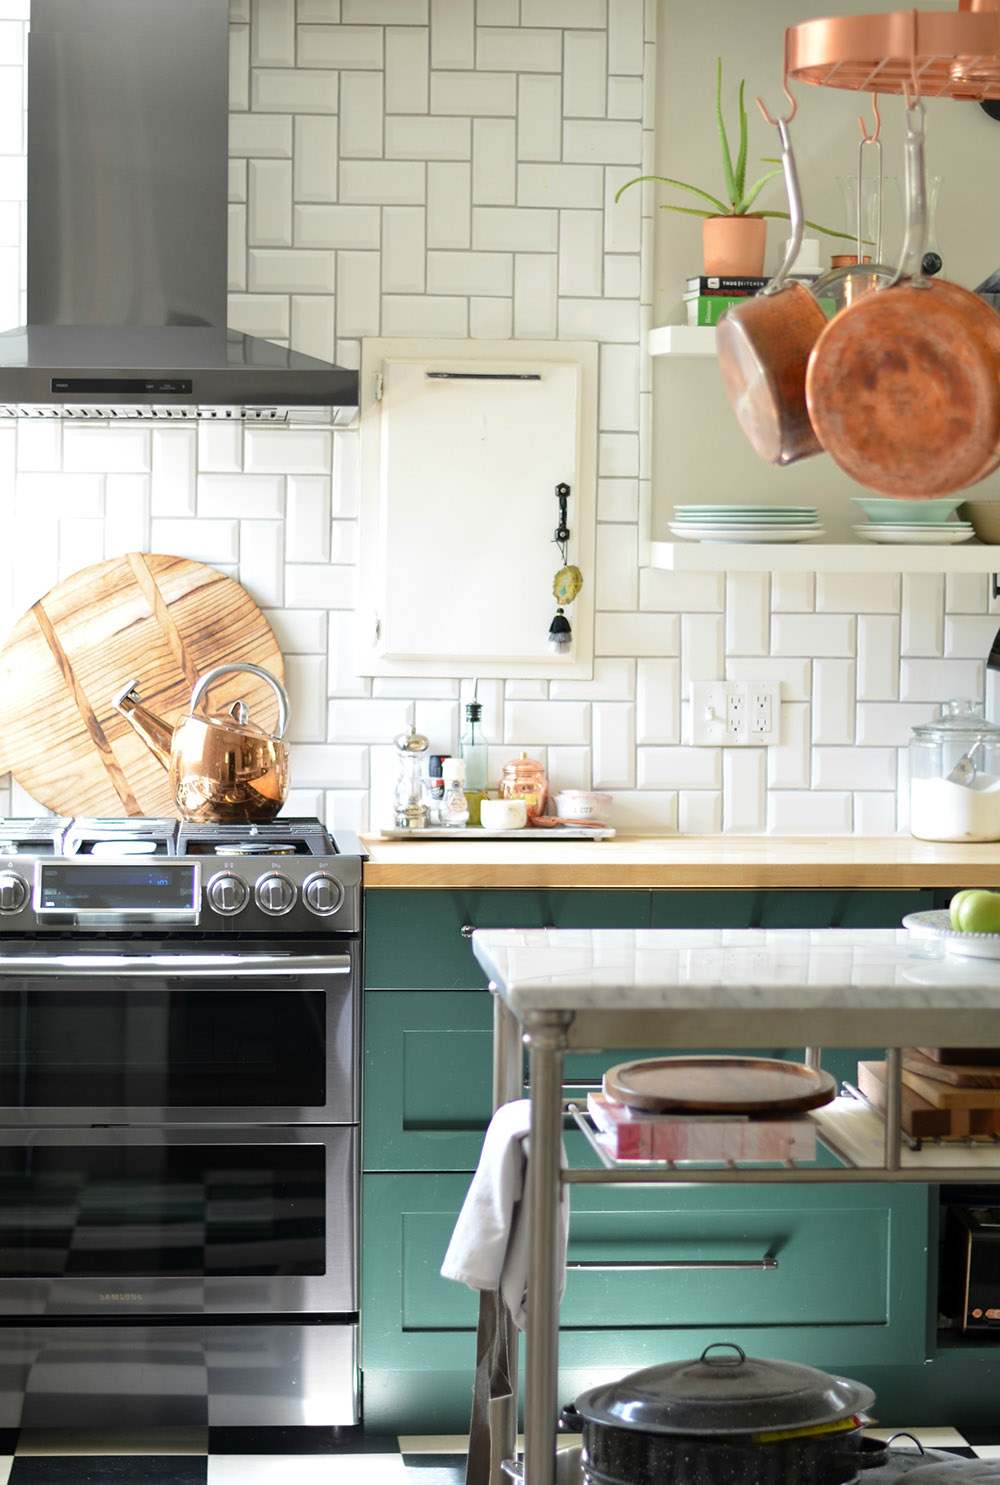 A kitchen with teal lower cabinets, butcher block countertops, and a white tile backsplash.